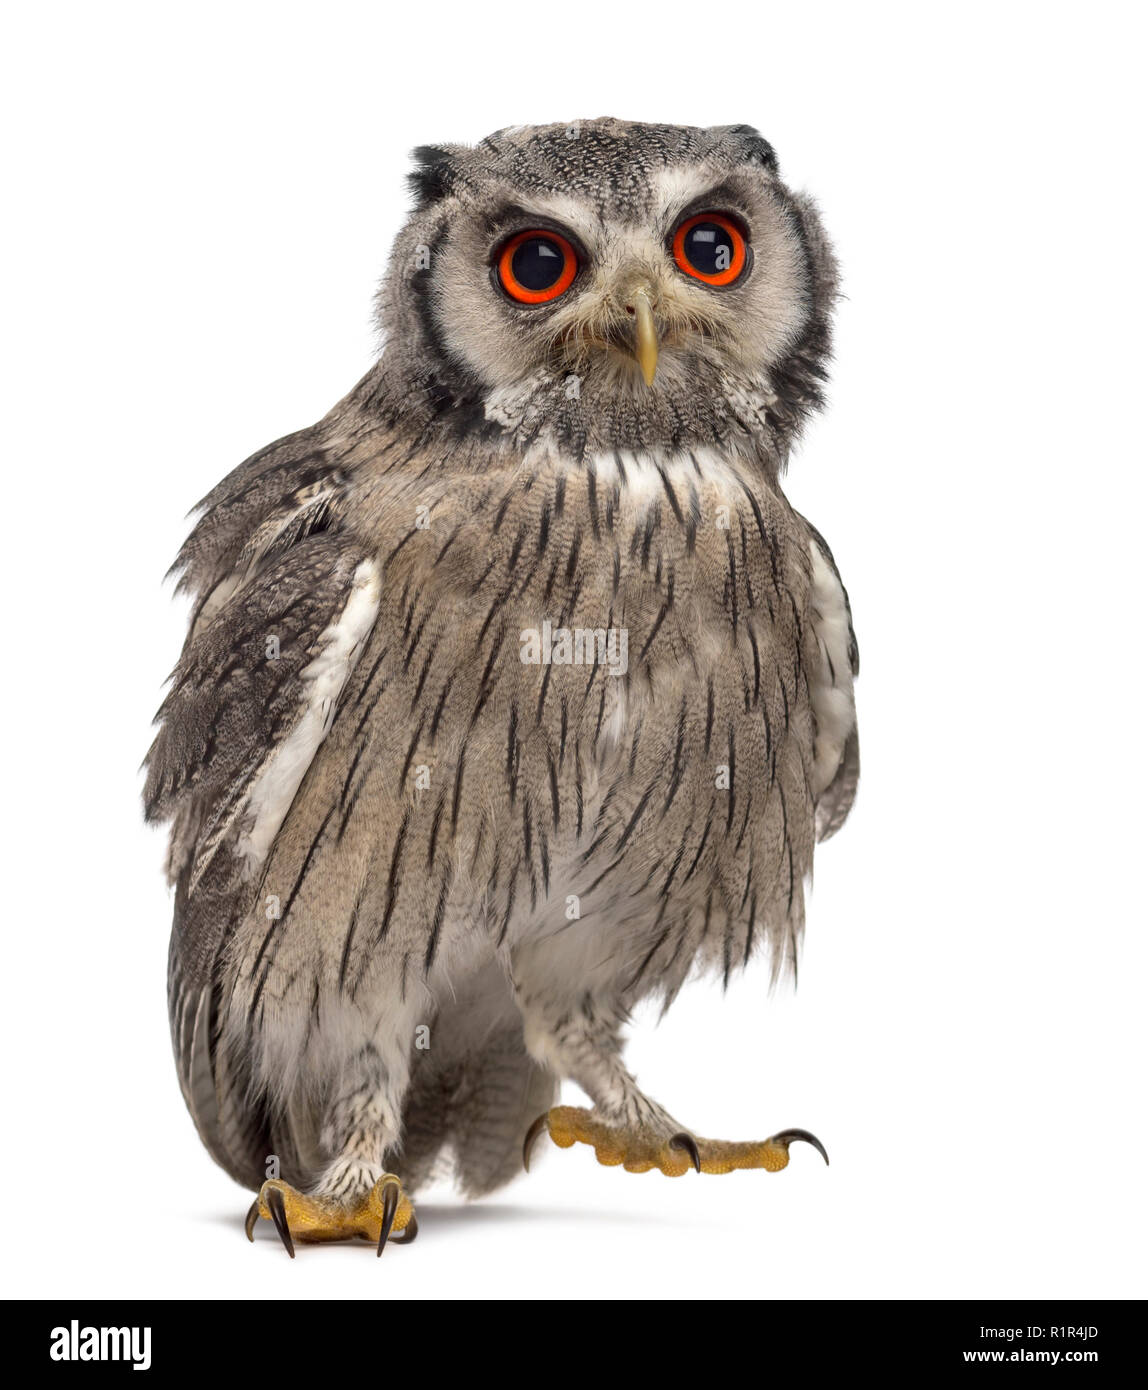 Northern white-faced owl - Ptilopsis leucotis (1 year old) in front of a white background Stock Photo